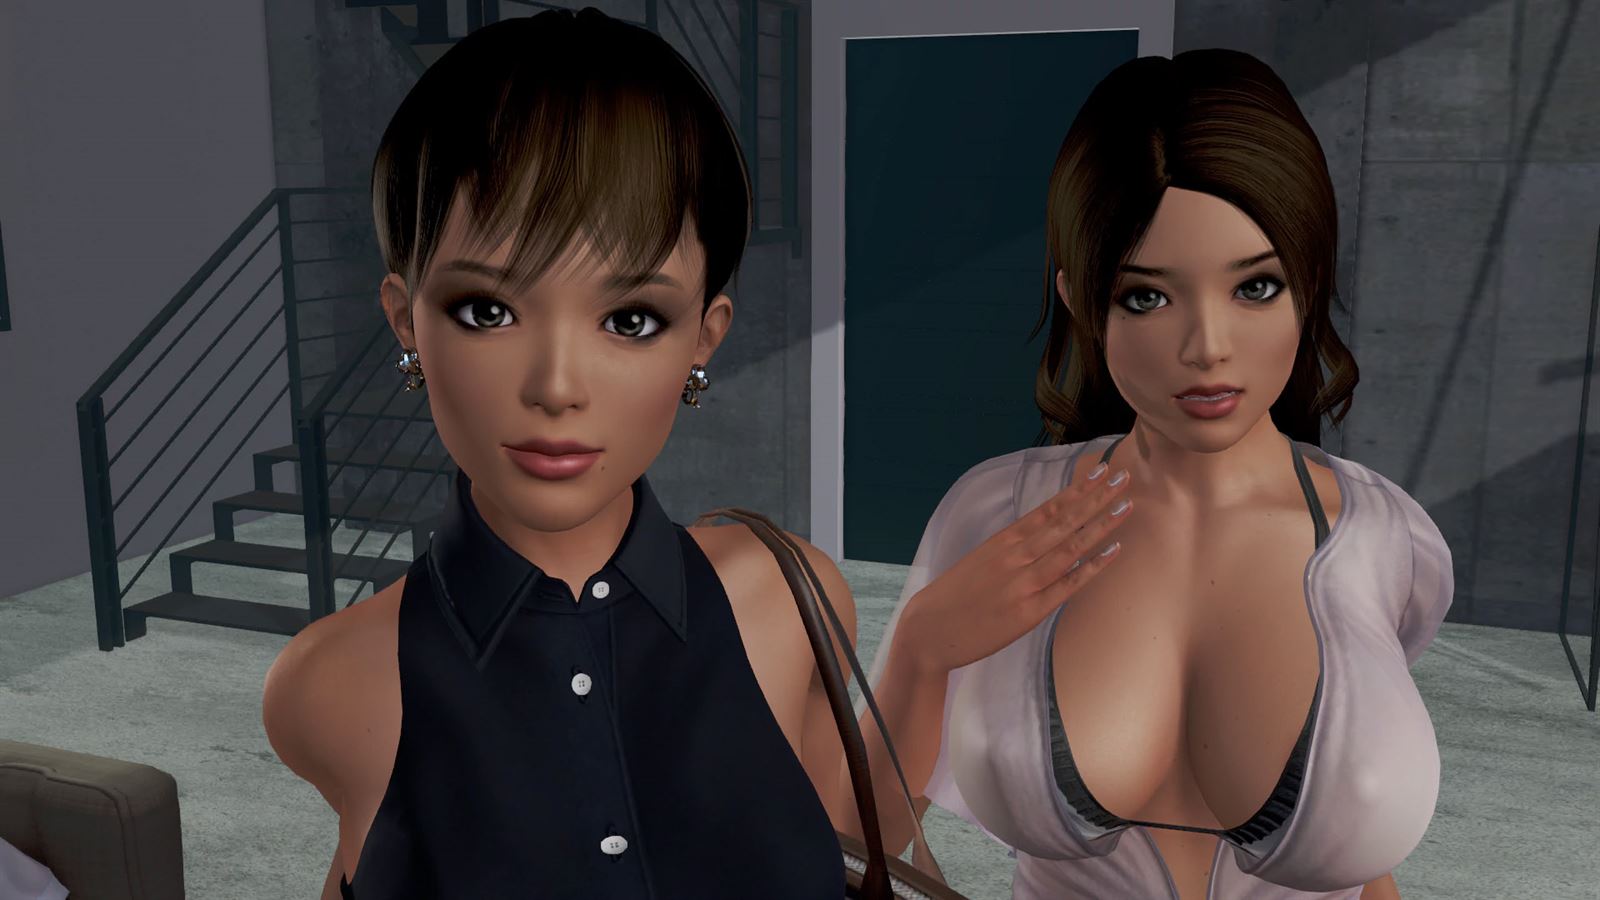 The Anomalous Dr Vibes Adult Game Screenshot (3) .